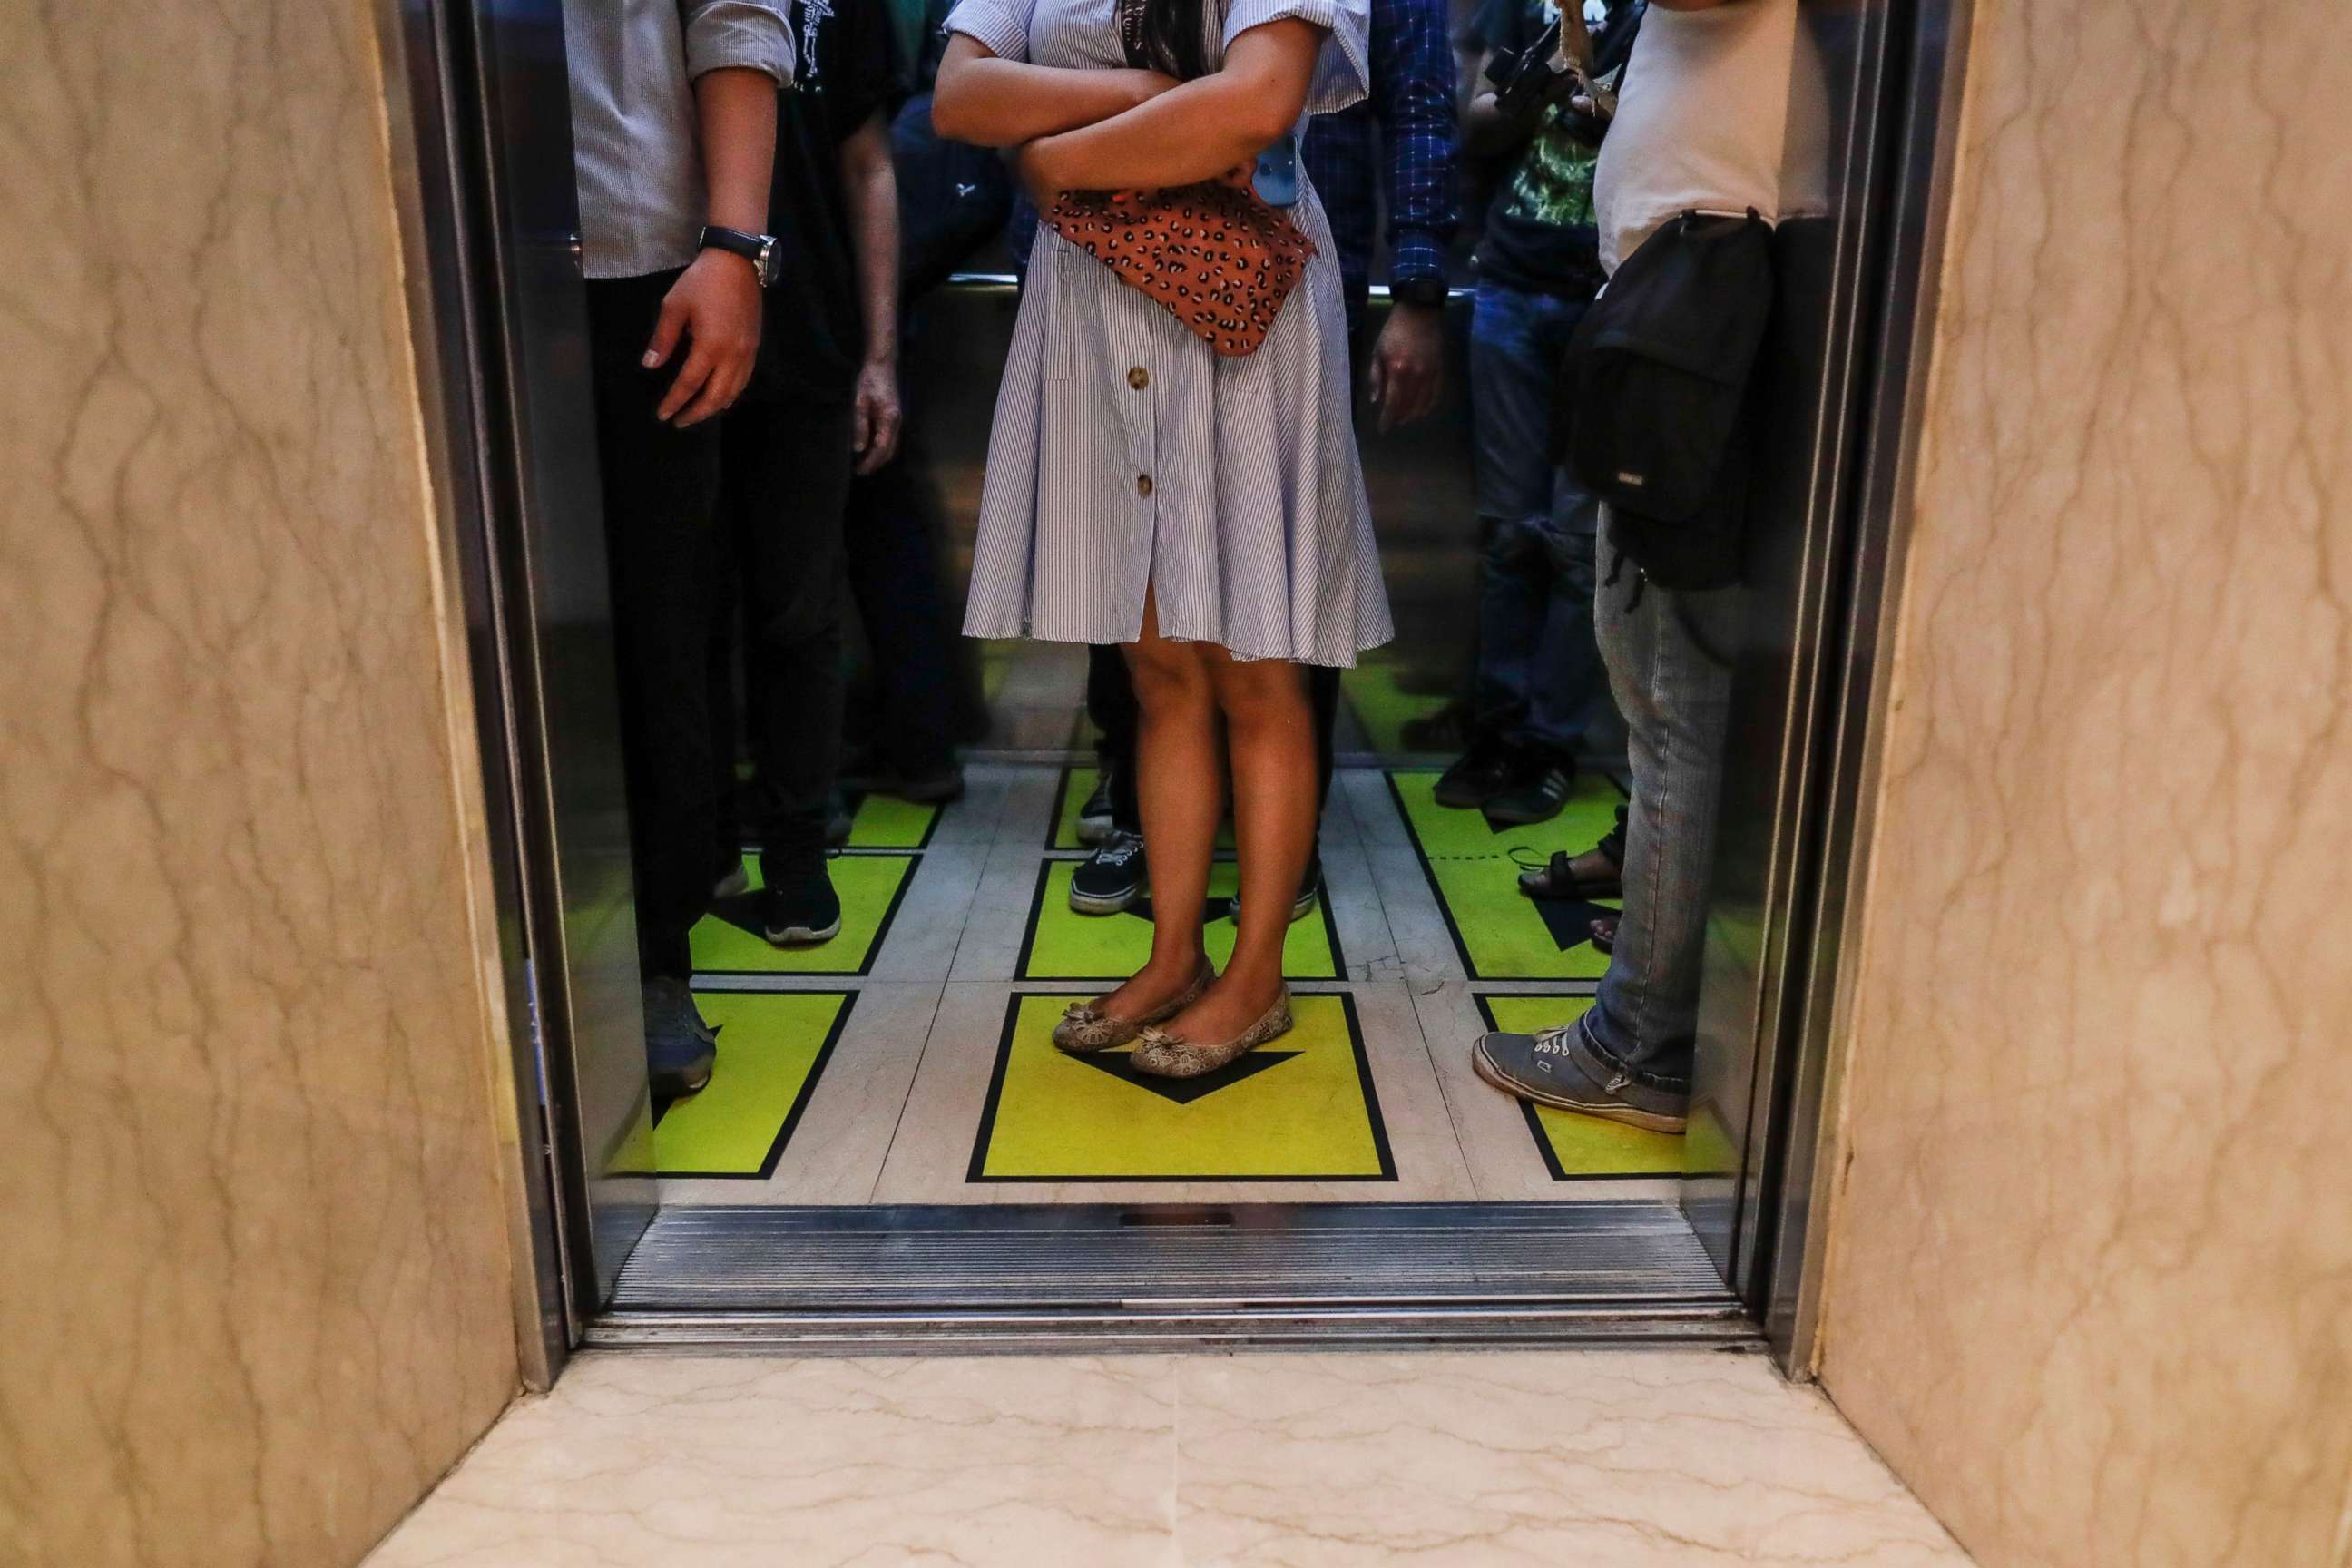 PHOTO: Workers stand on social distancing marks inside an elevator of the Senayan City shopping mall in Jakarta, Indonesia, June 9, 2020.